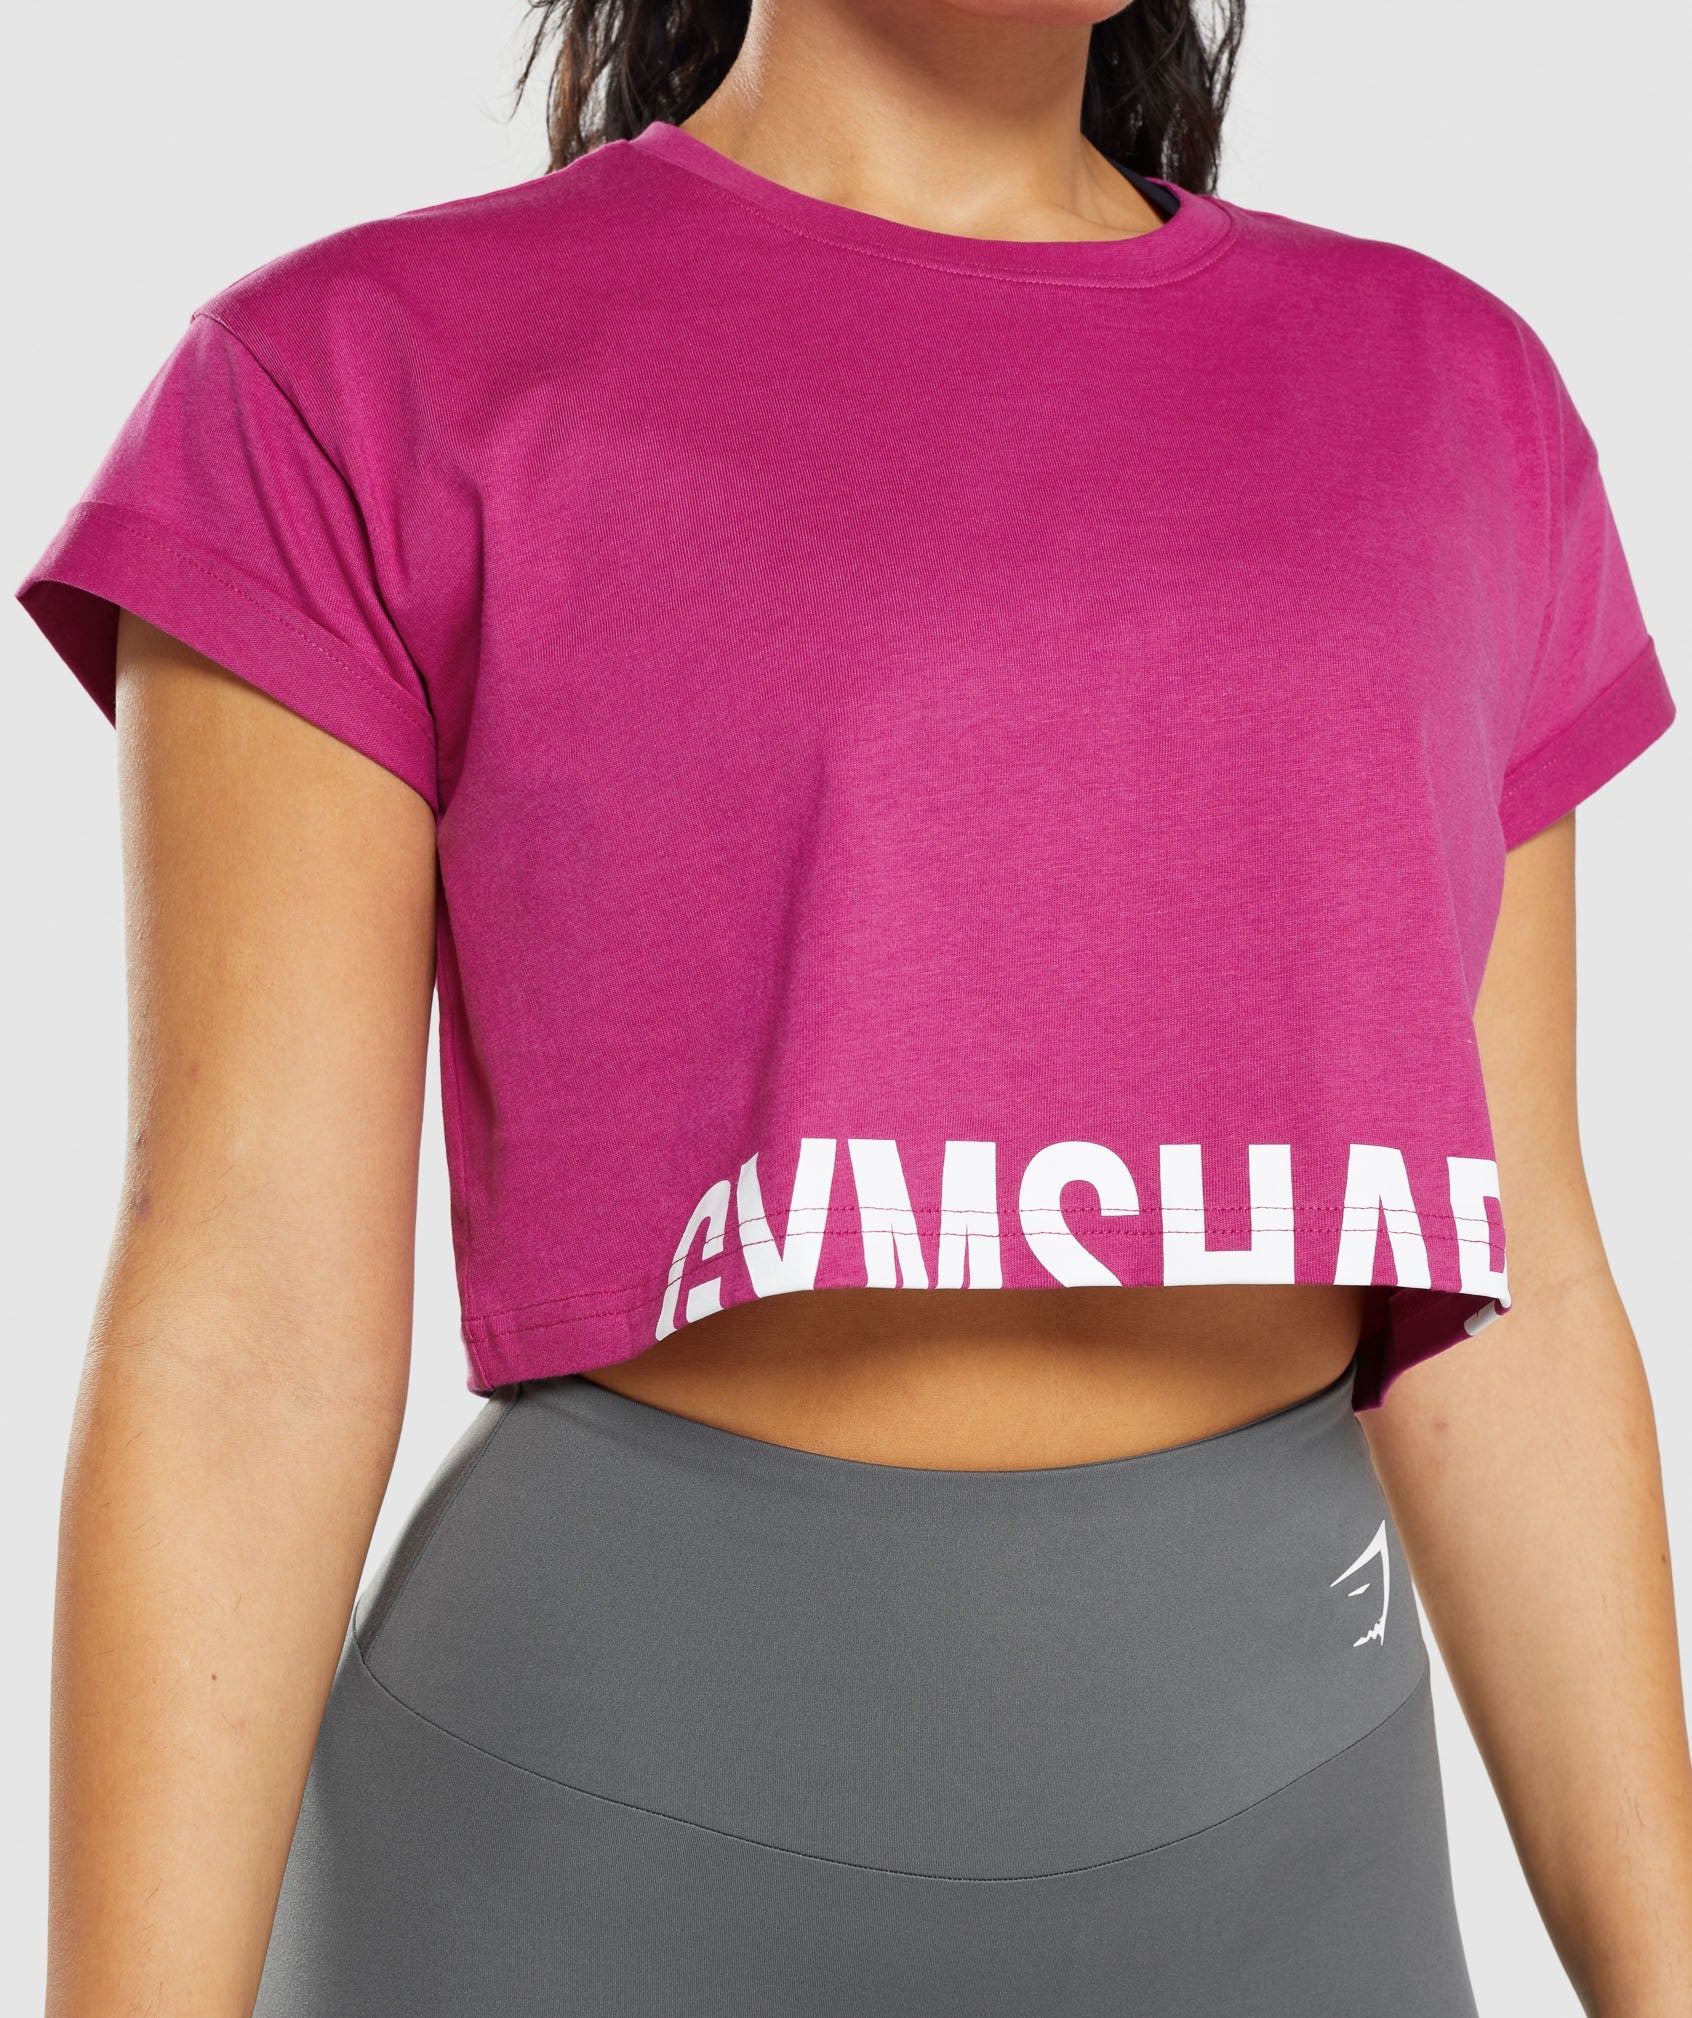 Fraction Crop Top in Dragon Pink - view 6